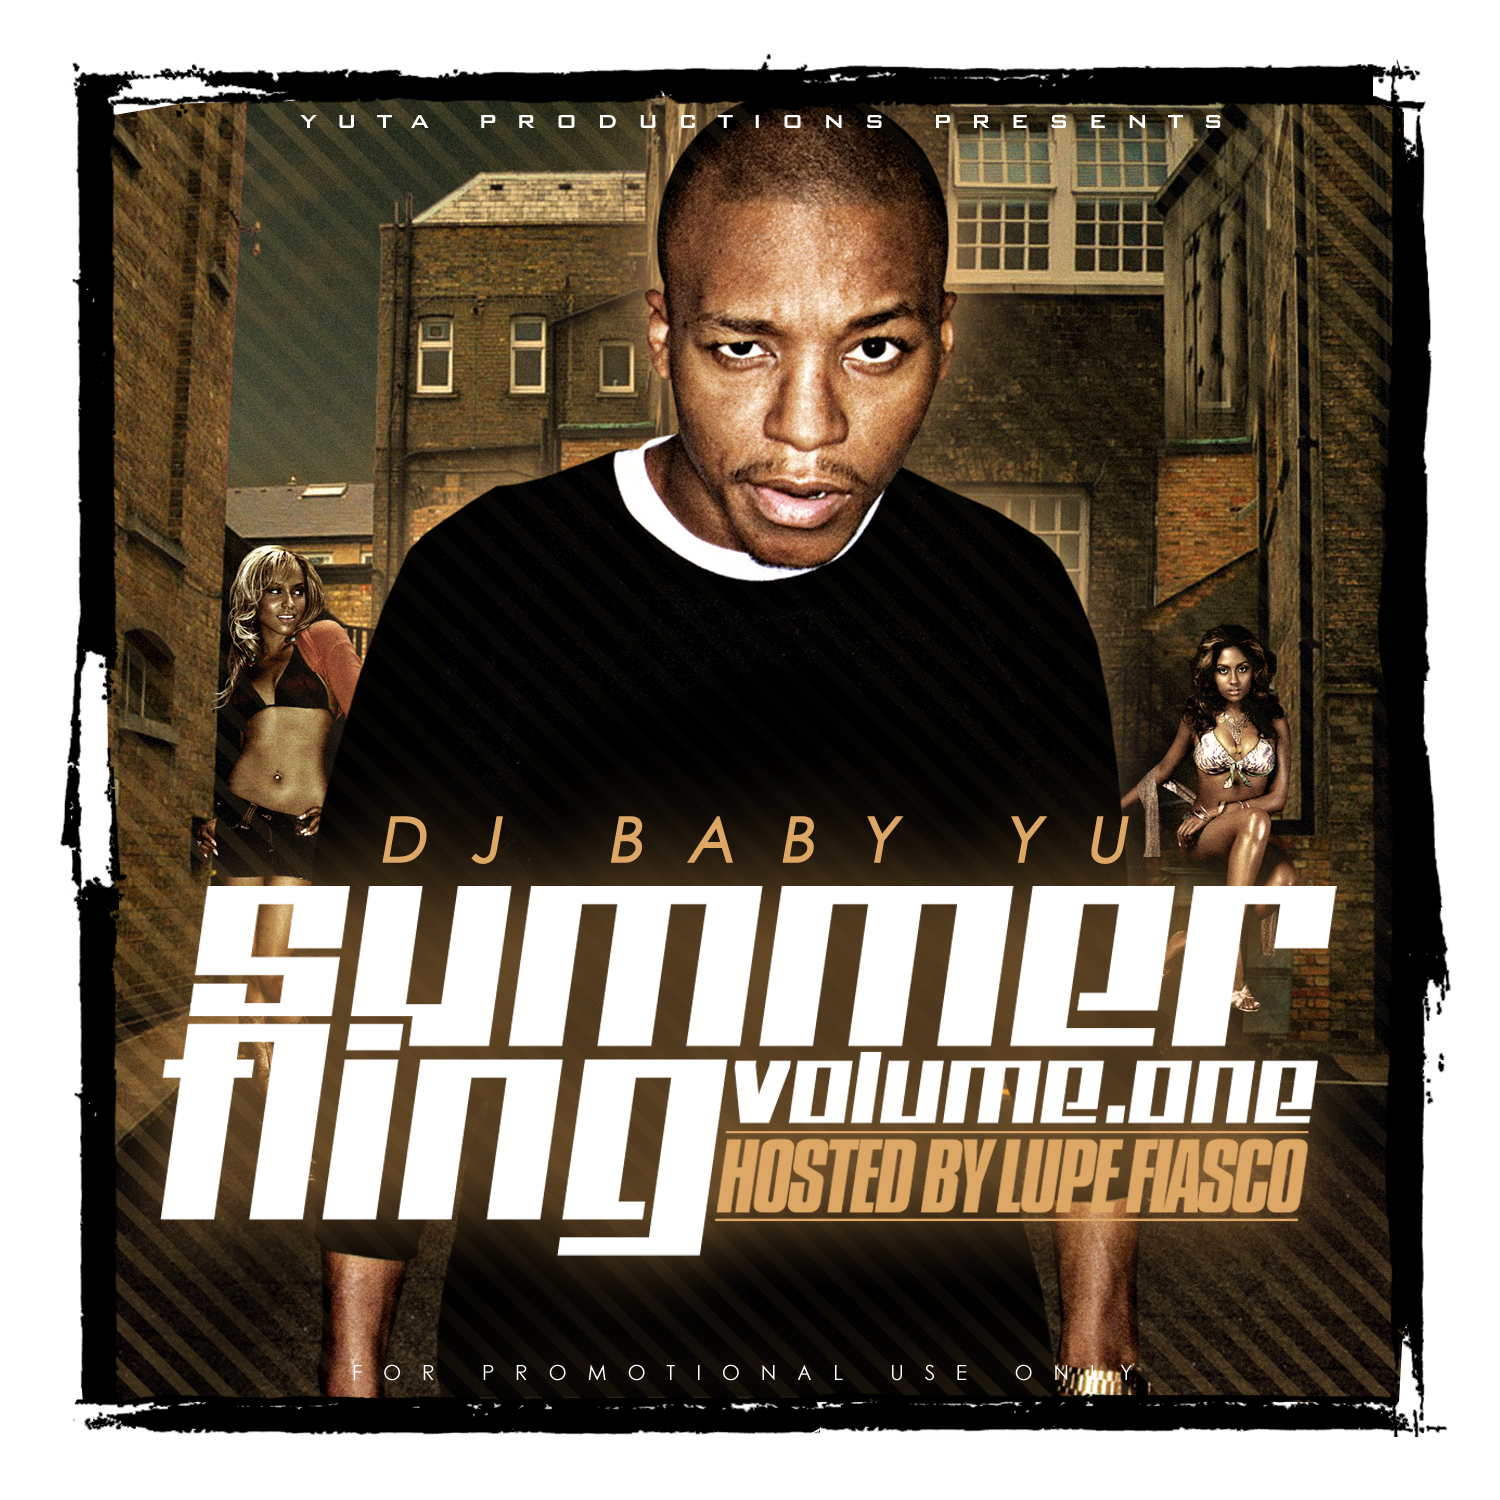 Summer Fling Mixtape Vol. 1 - Hosted By: Lupe Fiasco